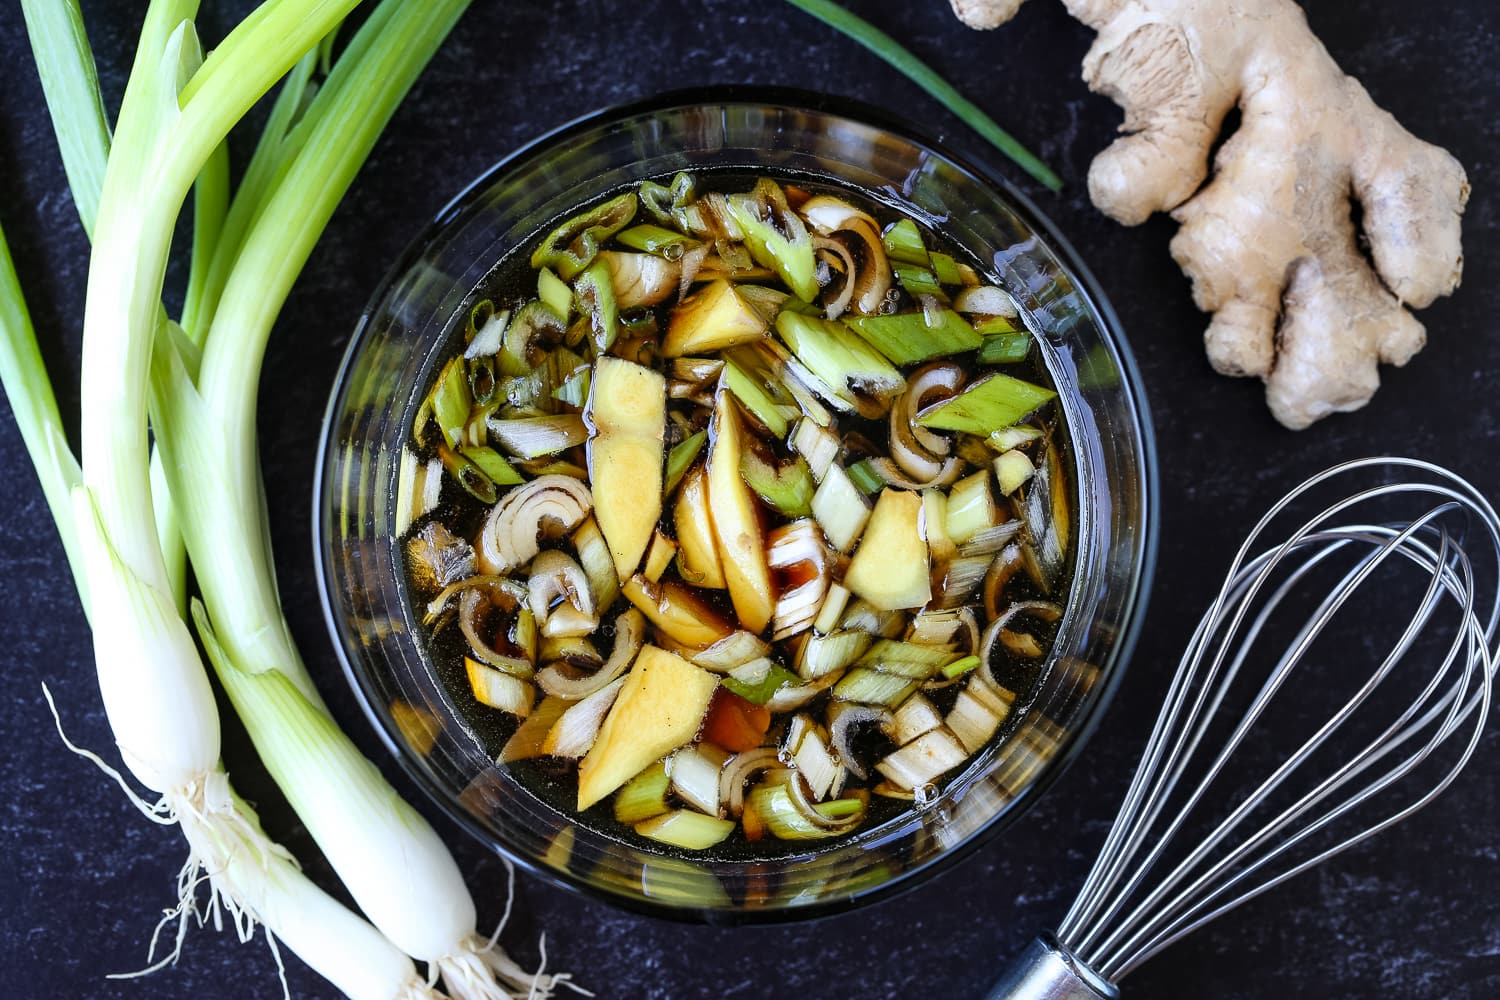 teriyaki marinade in bowl with scallions and ginger